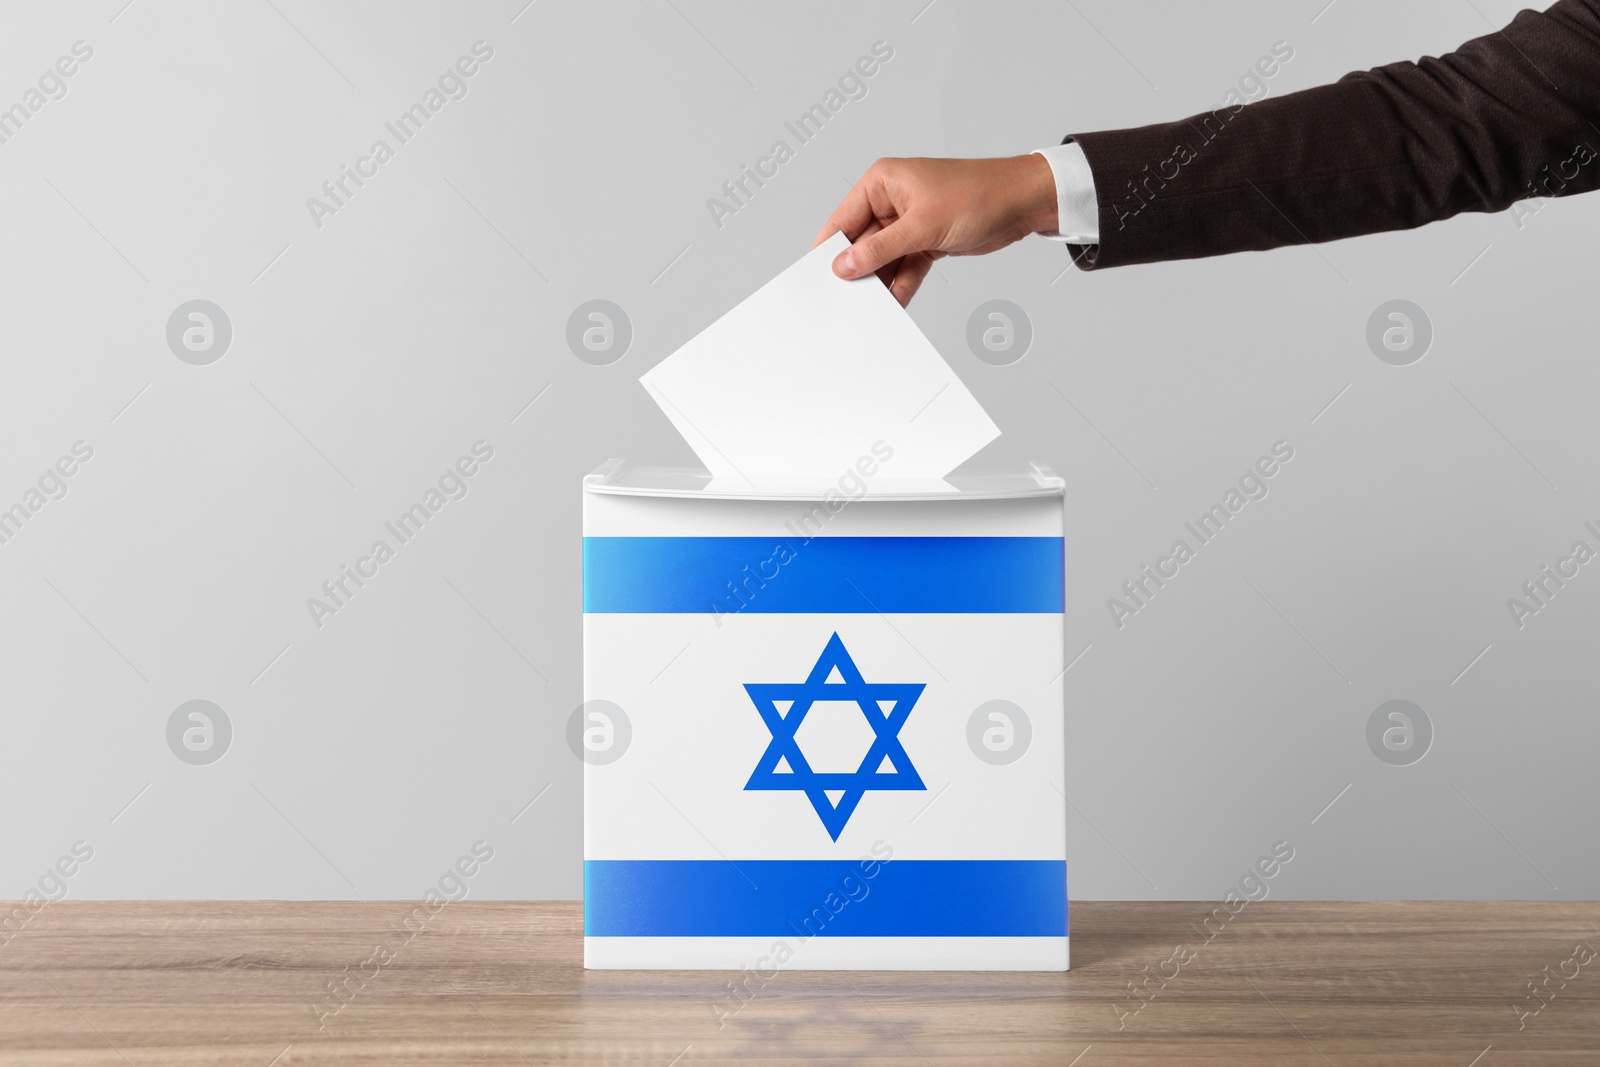 Image of Woman putting her vote into ballot box decorated with flag of Israel against light background, closeup